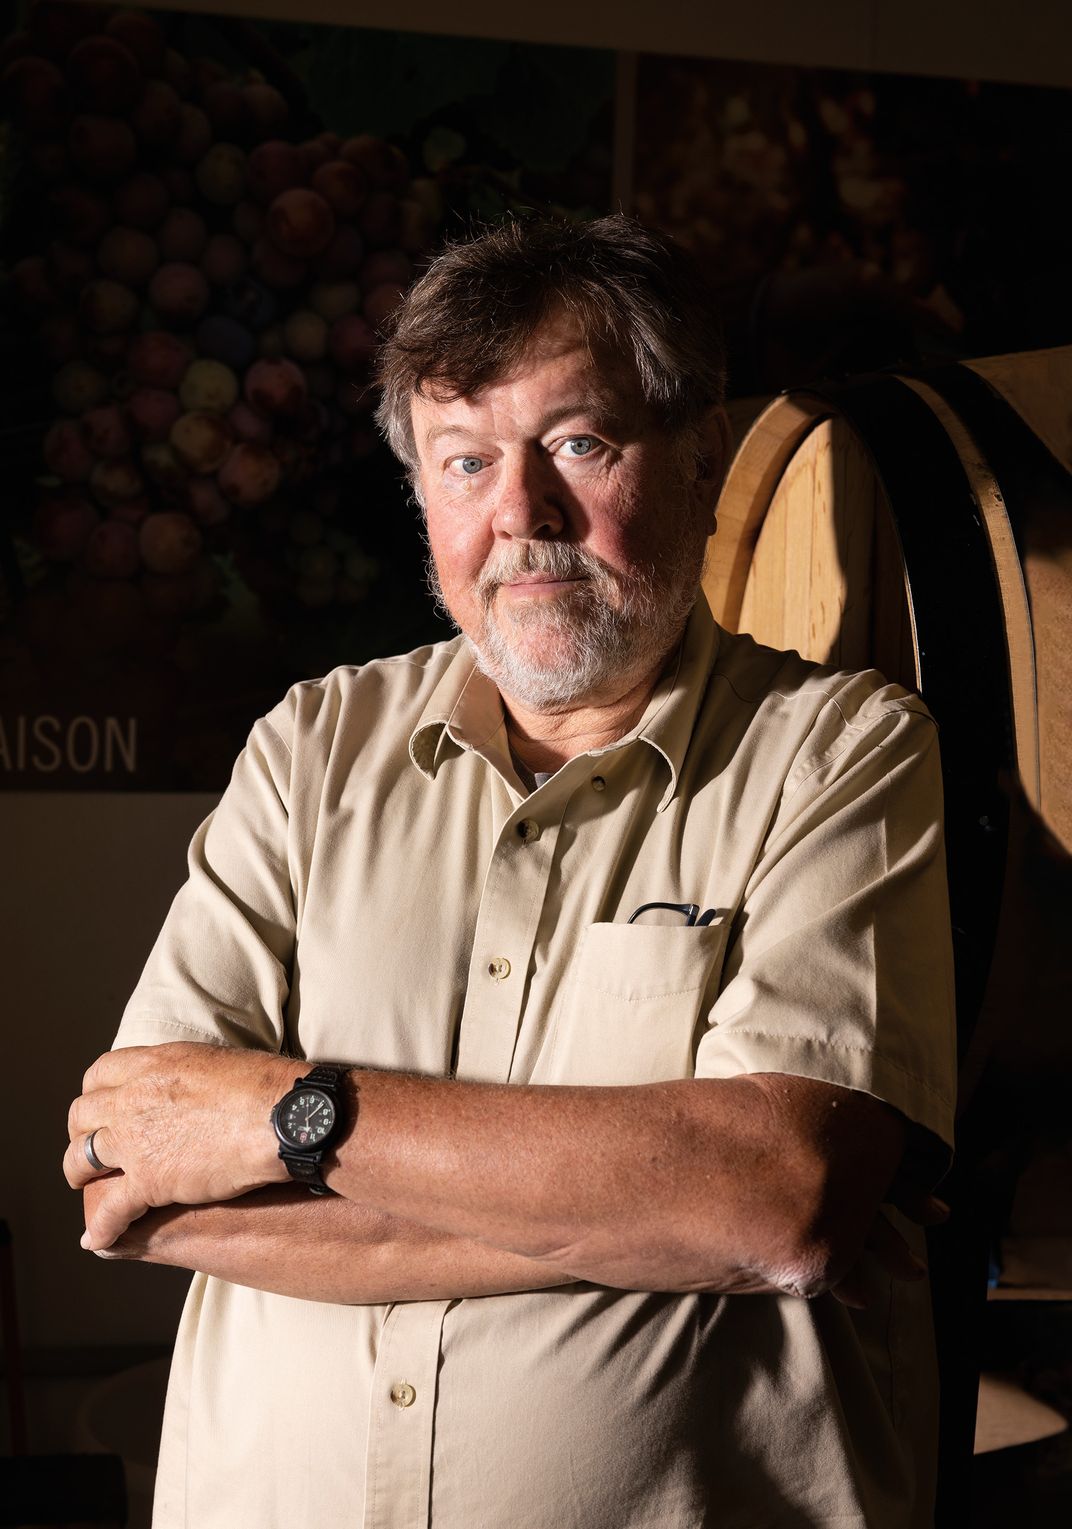 Eisterhold is convinced that Missouri can help revitalize the global wine industry—again.